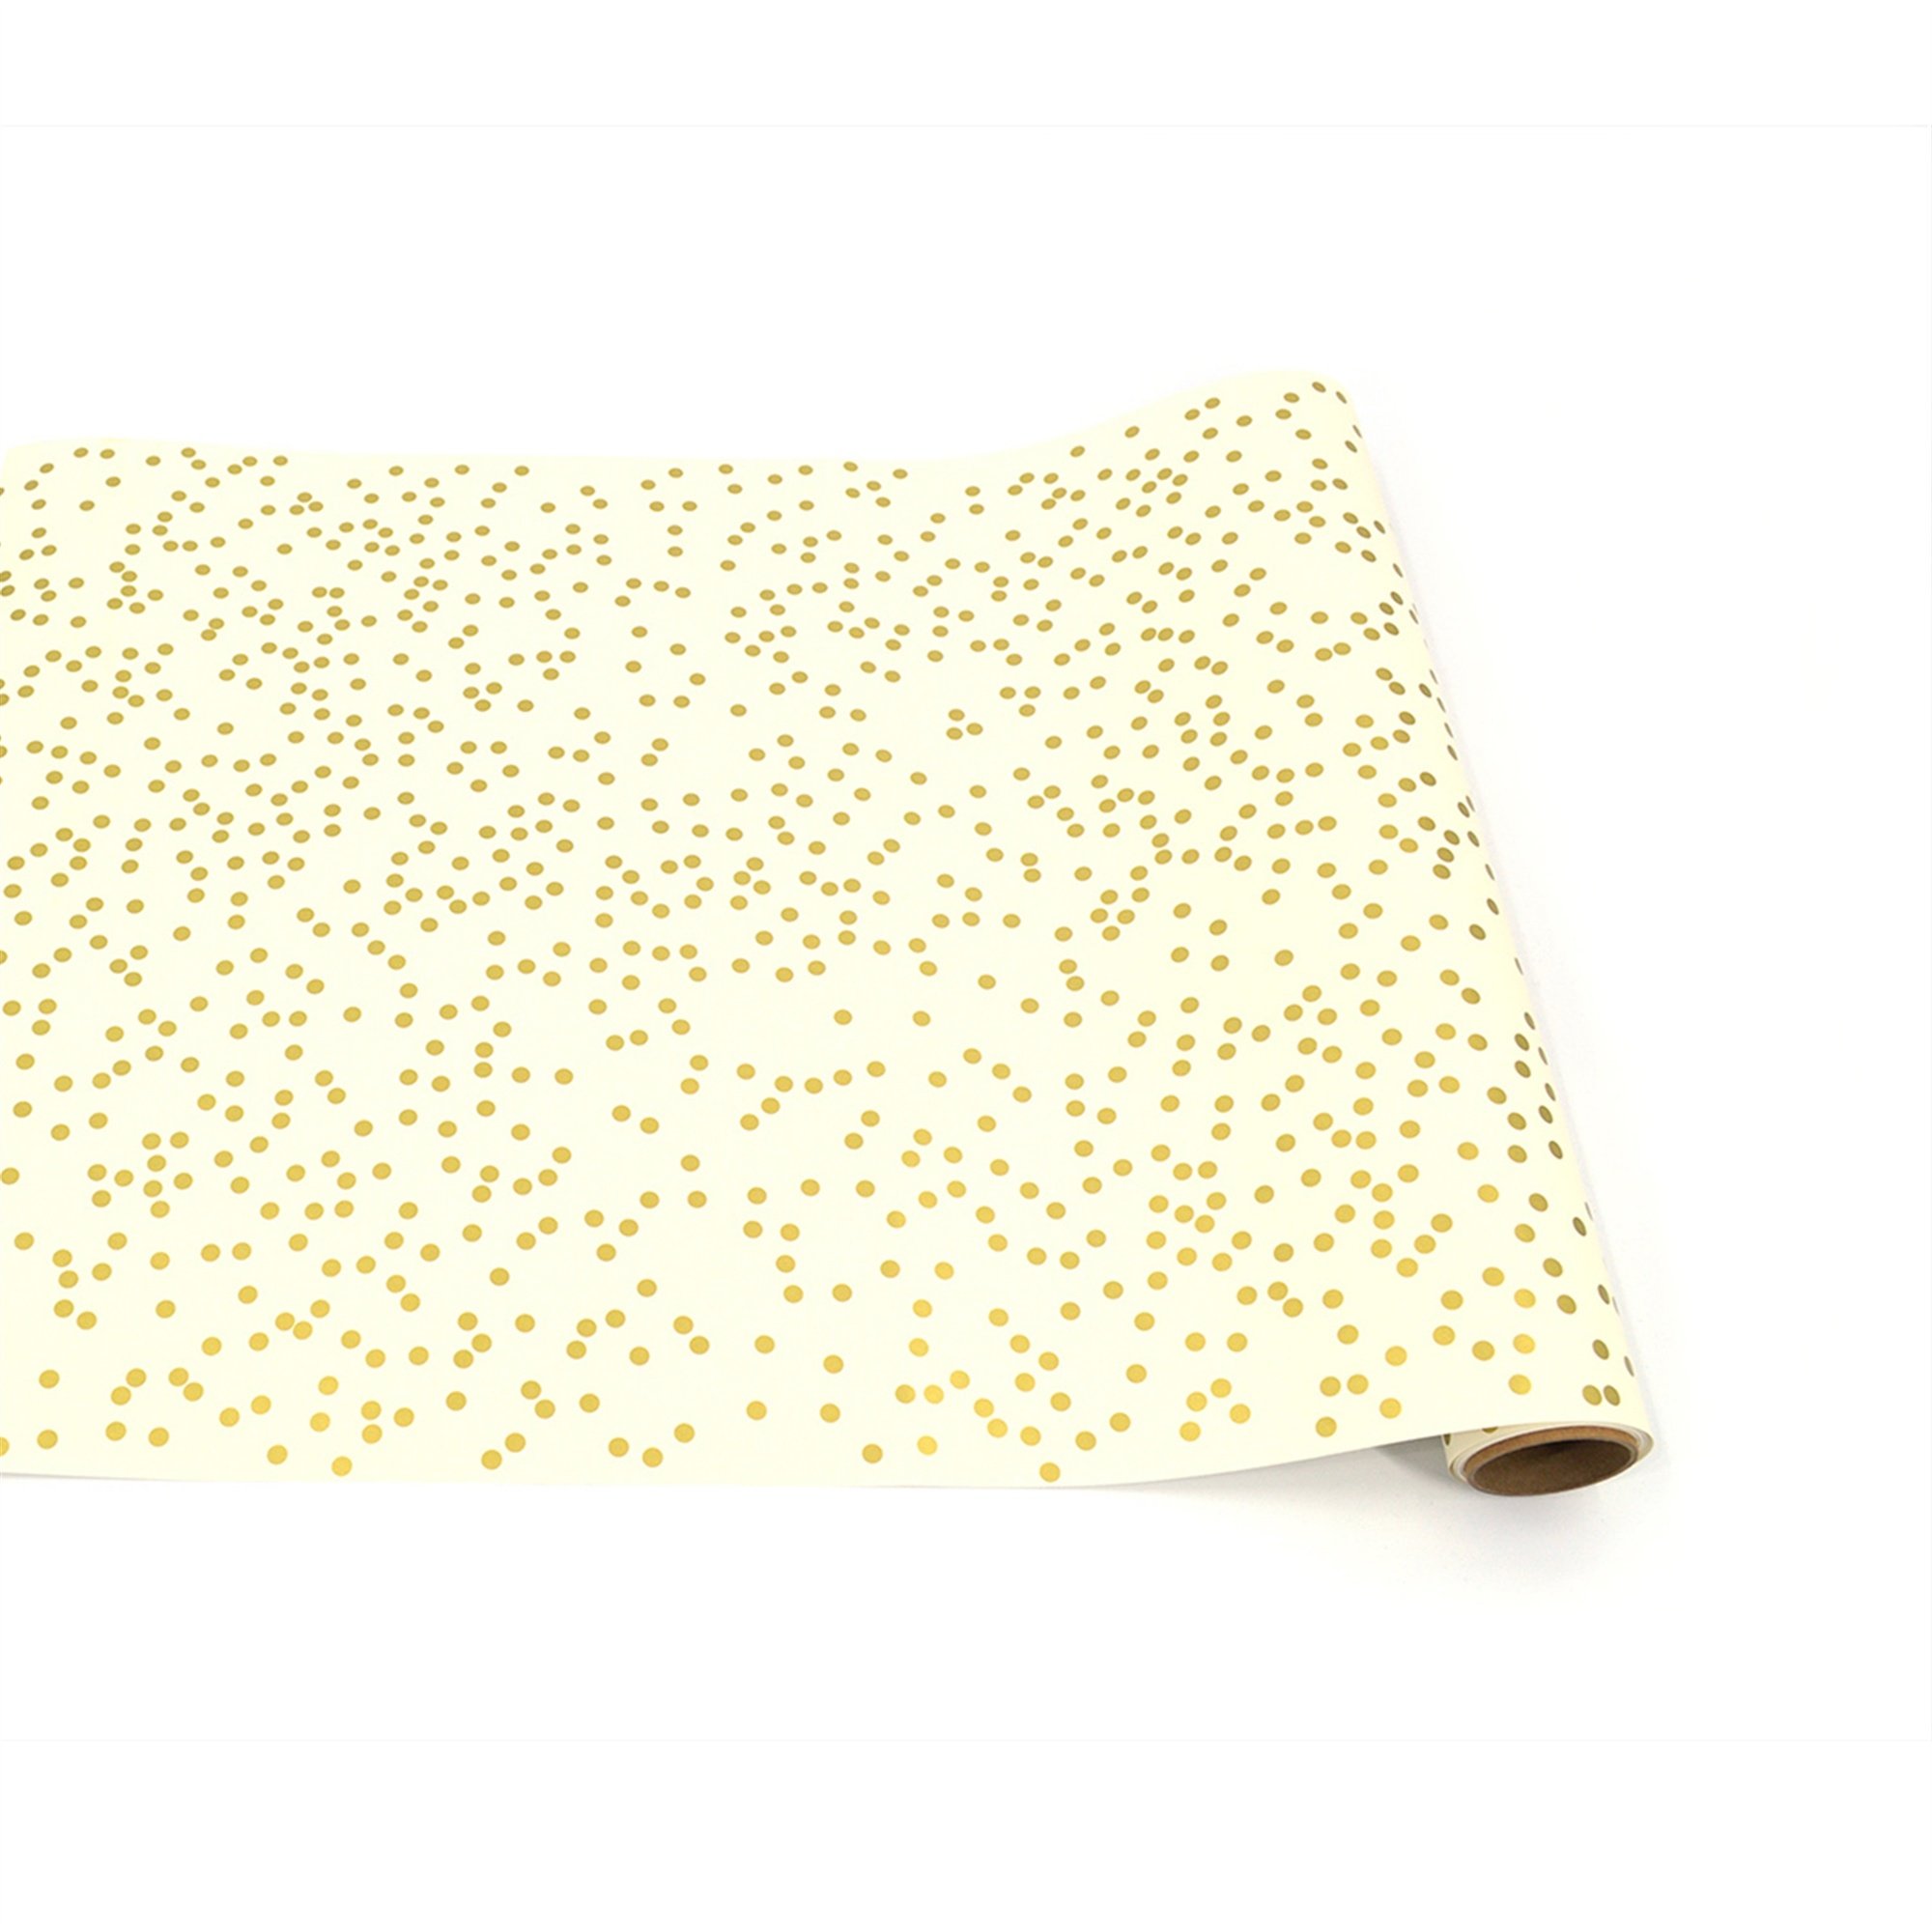 Hester & Cook Gold Confetti Table Runner